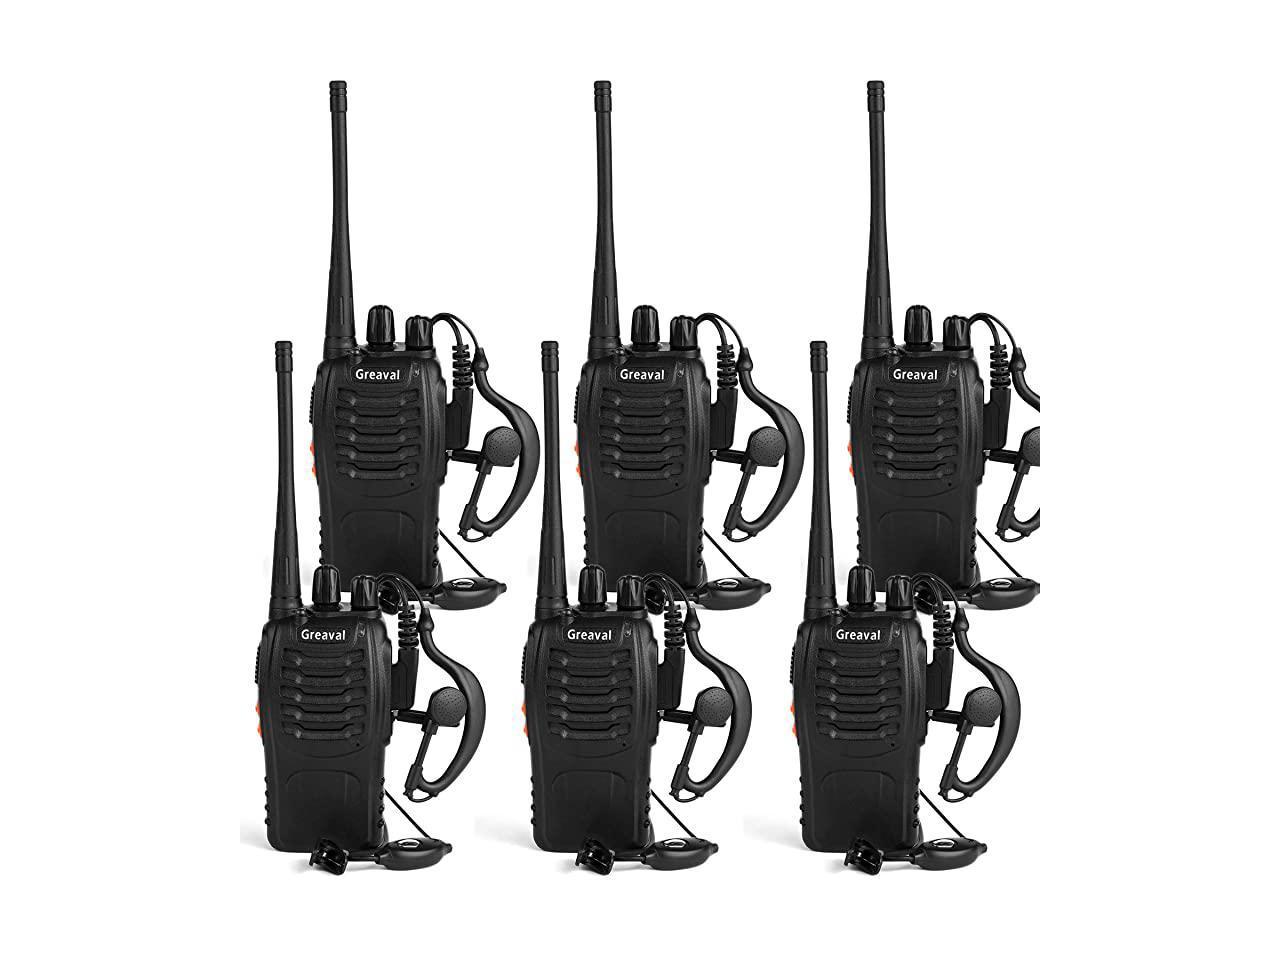 Flashlight Rechargeable Long Distance Two Way Radio Support VOX Function for Field Survival and Other Activities Long Range Walkie Talkies with Original Earpieces with 16CH 2pcs Walkie Talkies 